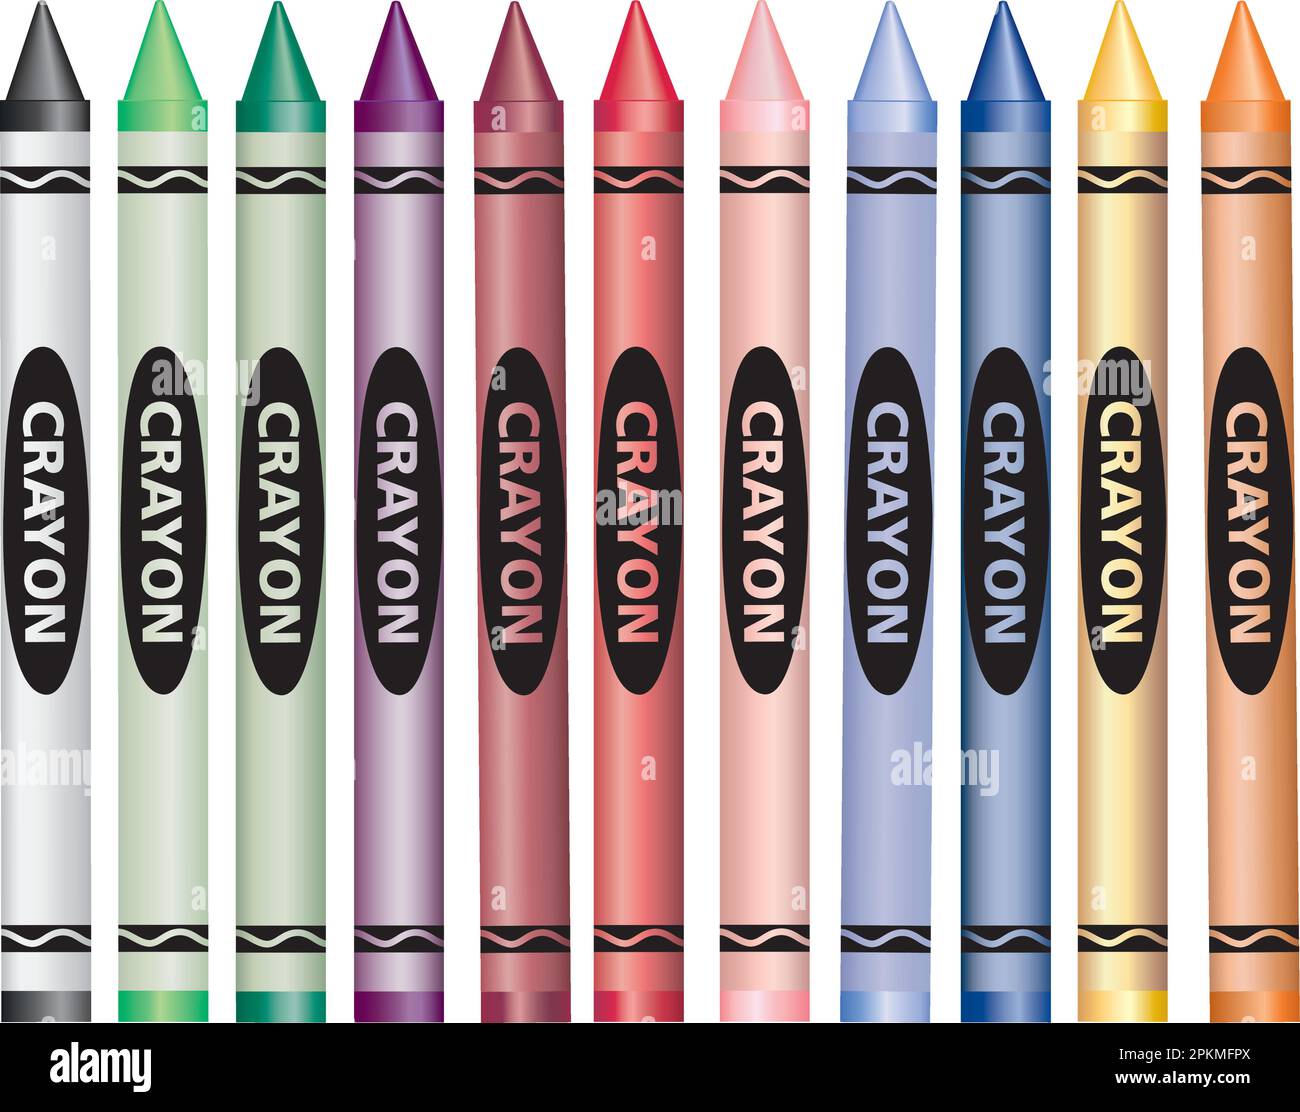 Crayons - an Illustrator 8.0 file - full color all vector art, realistic shading. Isolated; may be edited, resized, turned, or moved individually Stock Vector